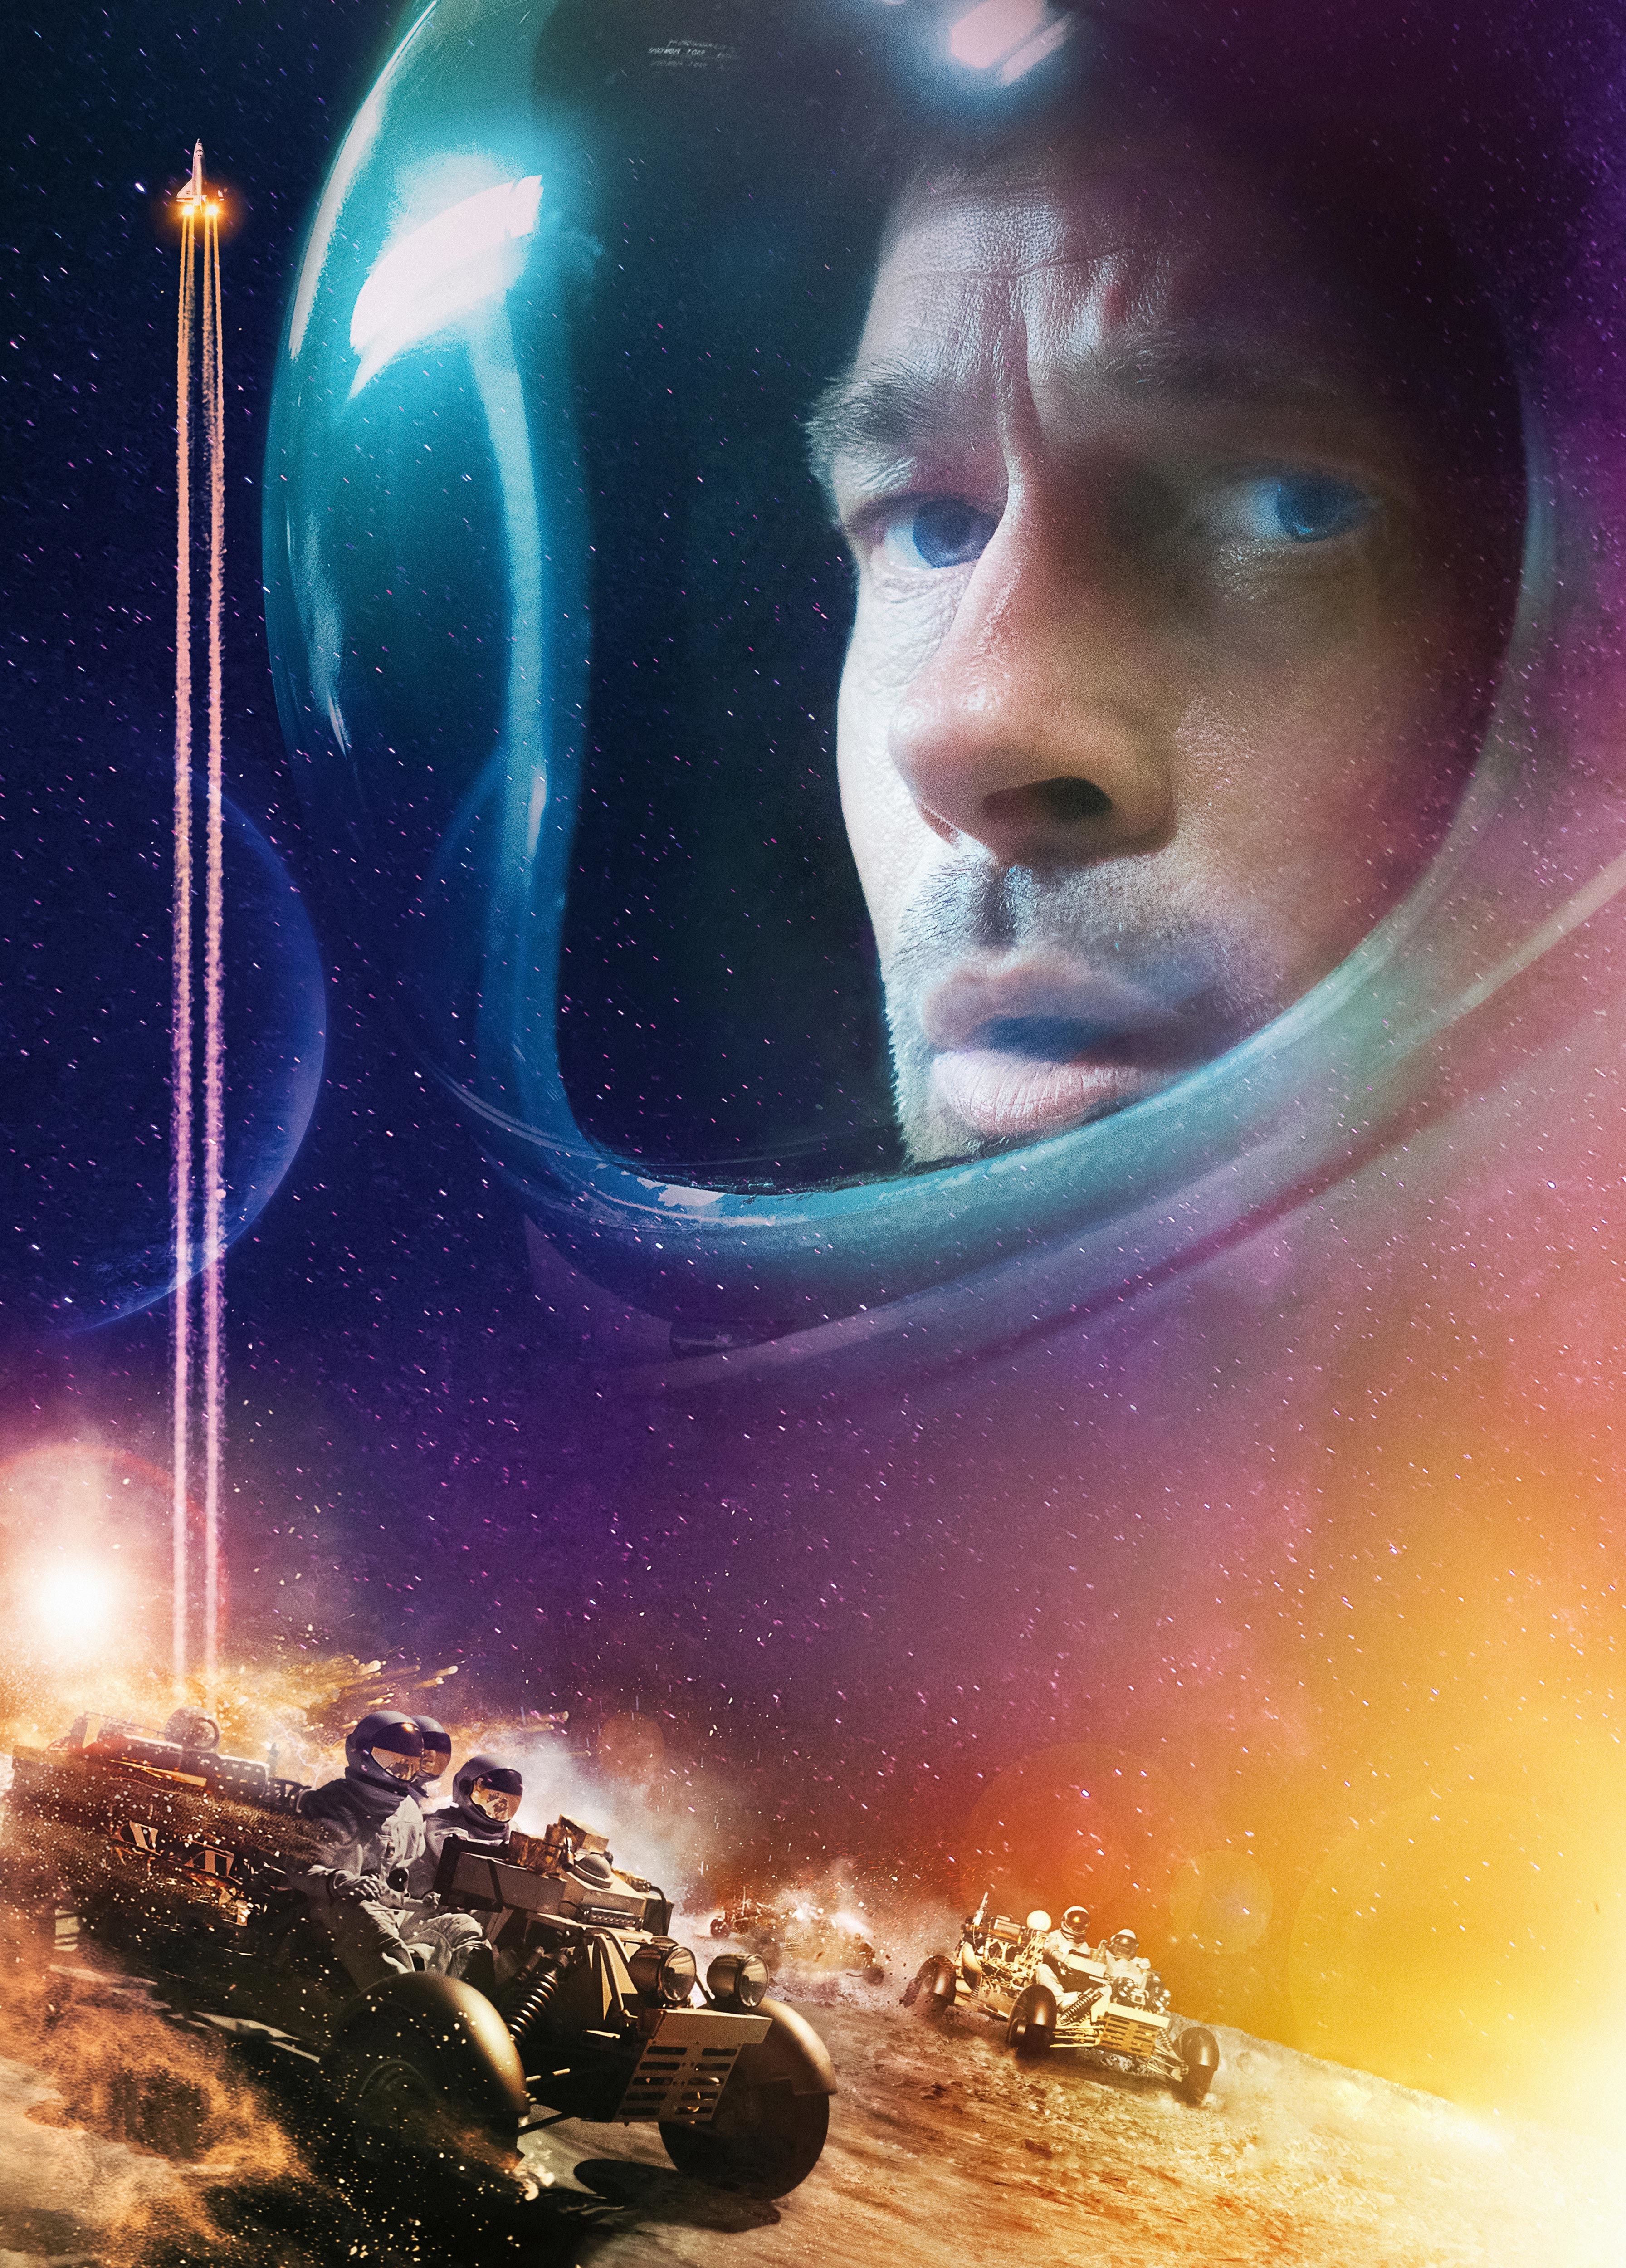 25 Best Photos Ad Astra Full Movie Hd / Ad Astra review: Dir. James Gray (2019) | critical popcorn